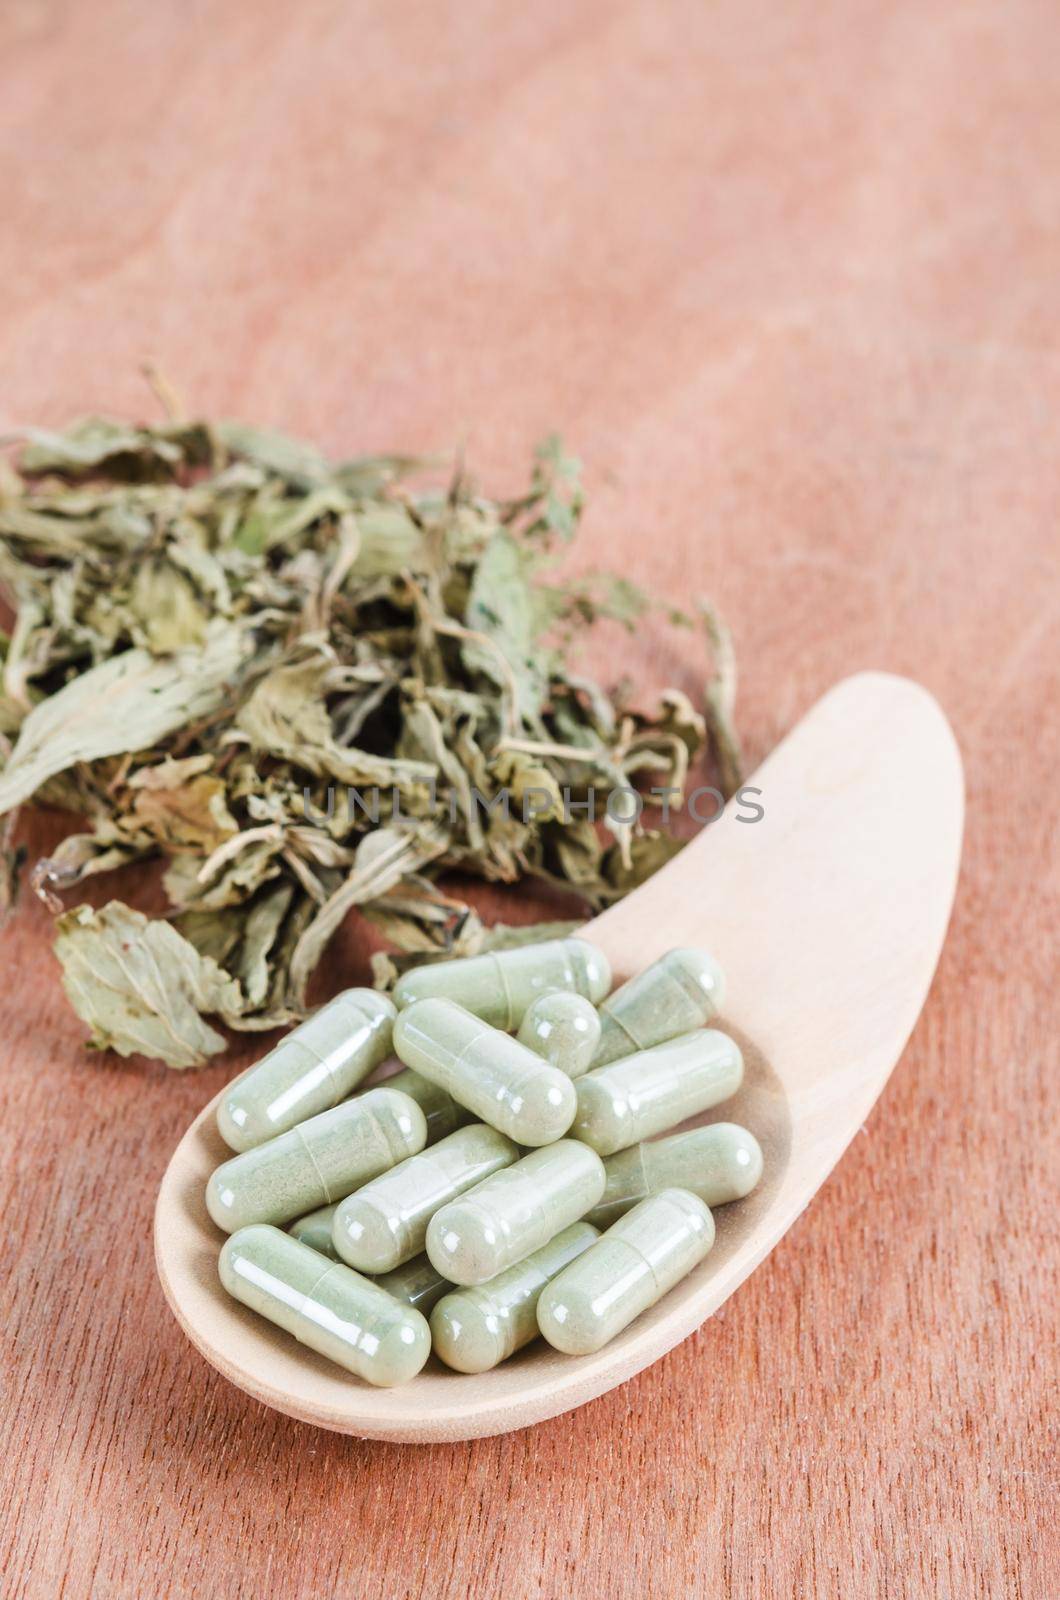 Pile of herbal medicine in capsules with herb dry leaf on wooden background.